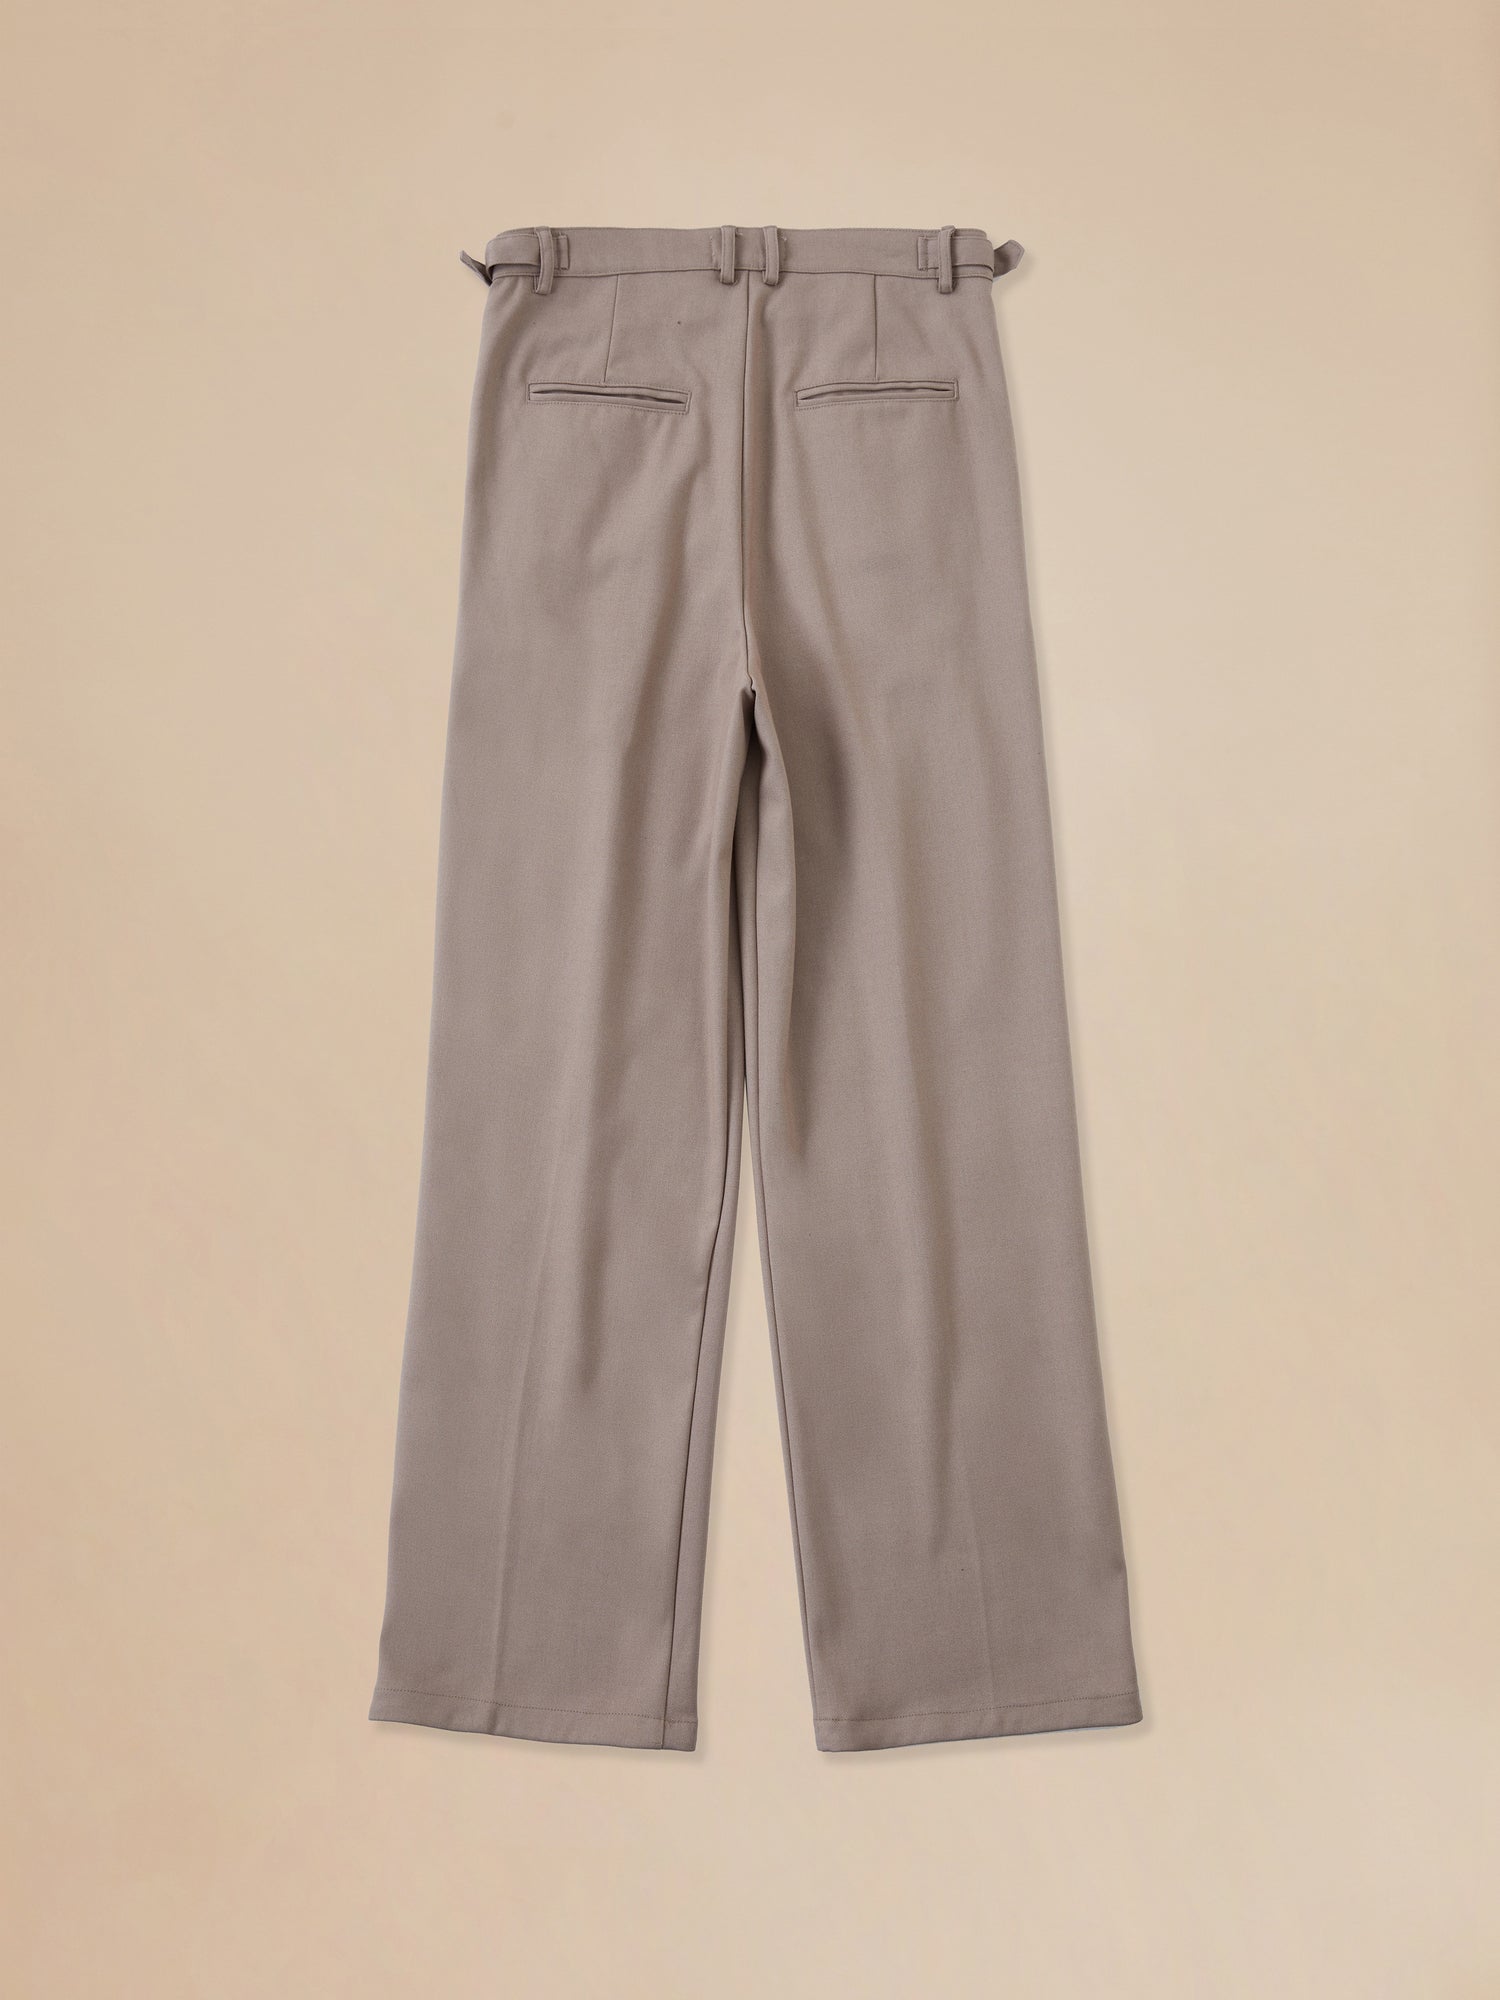 A pair of Found's Pleated Trousers in beige.